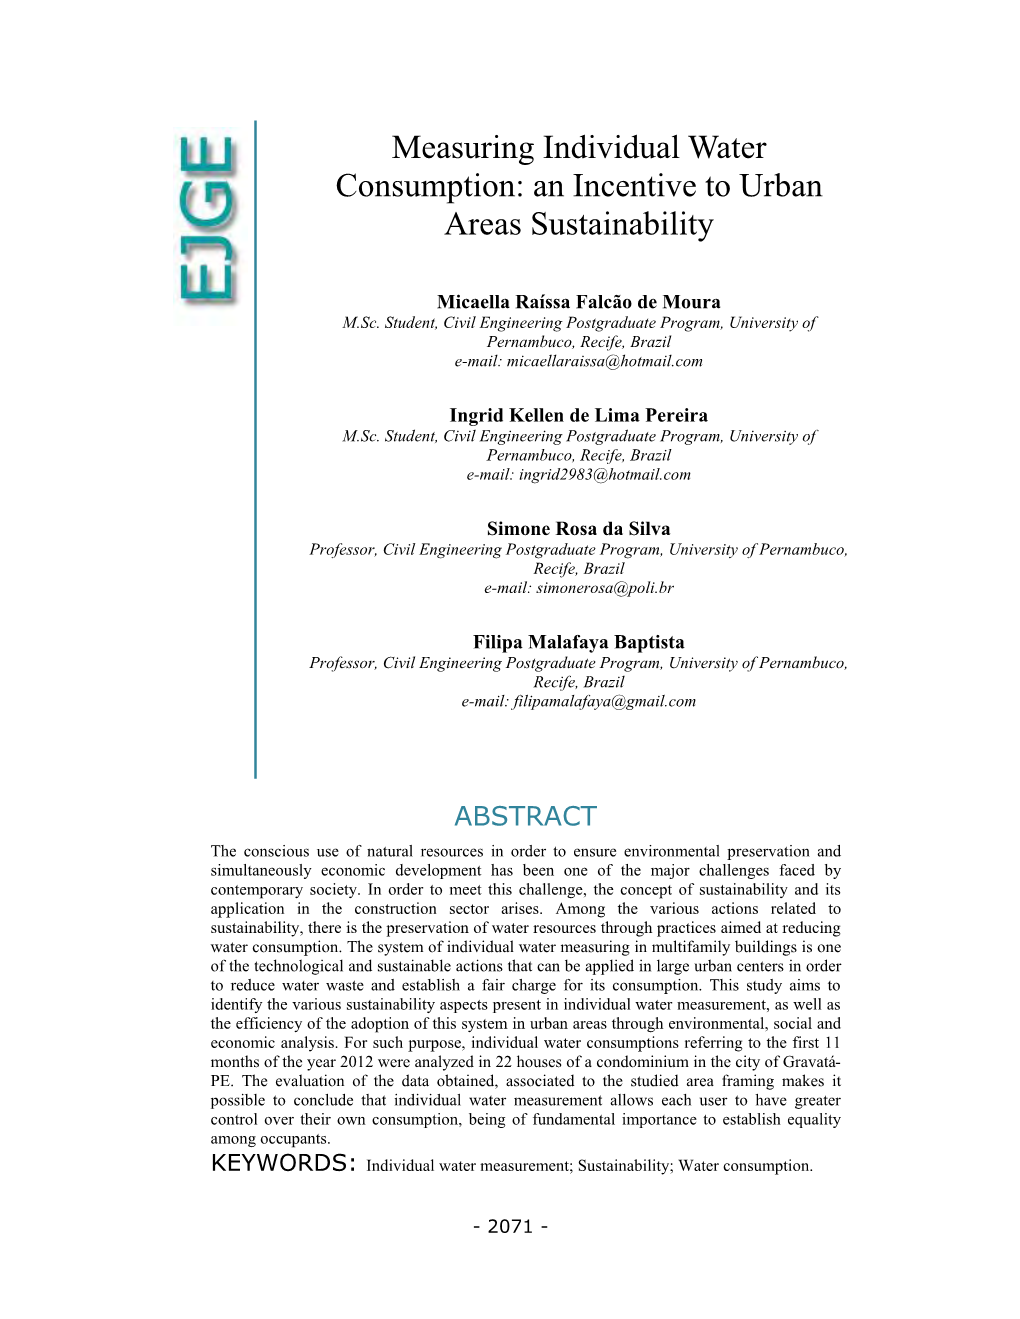 Measuring Individual Water Consumption: an Incentive to Urban Areas Sustainability